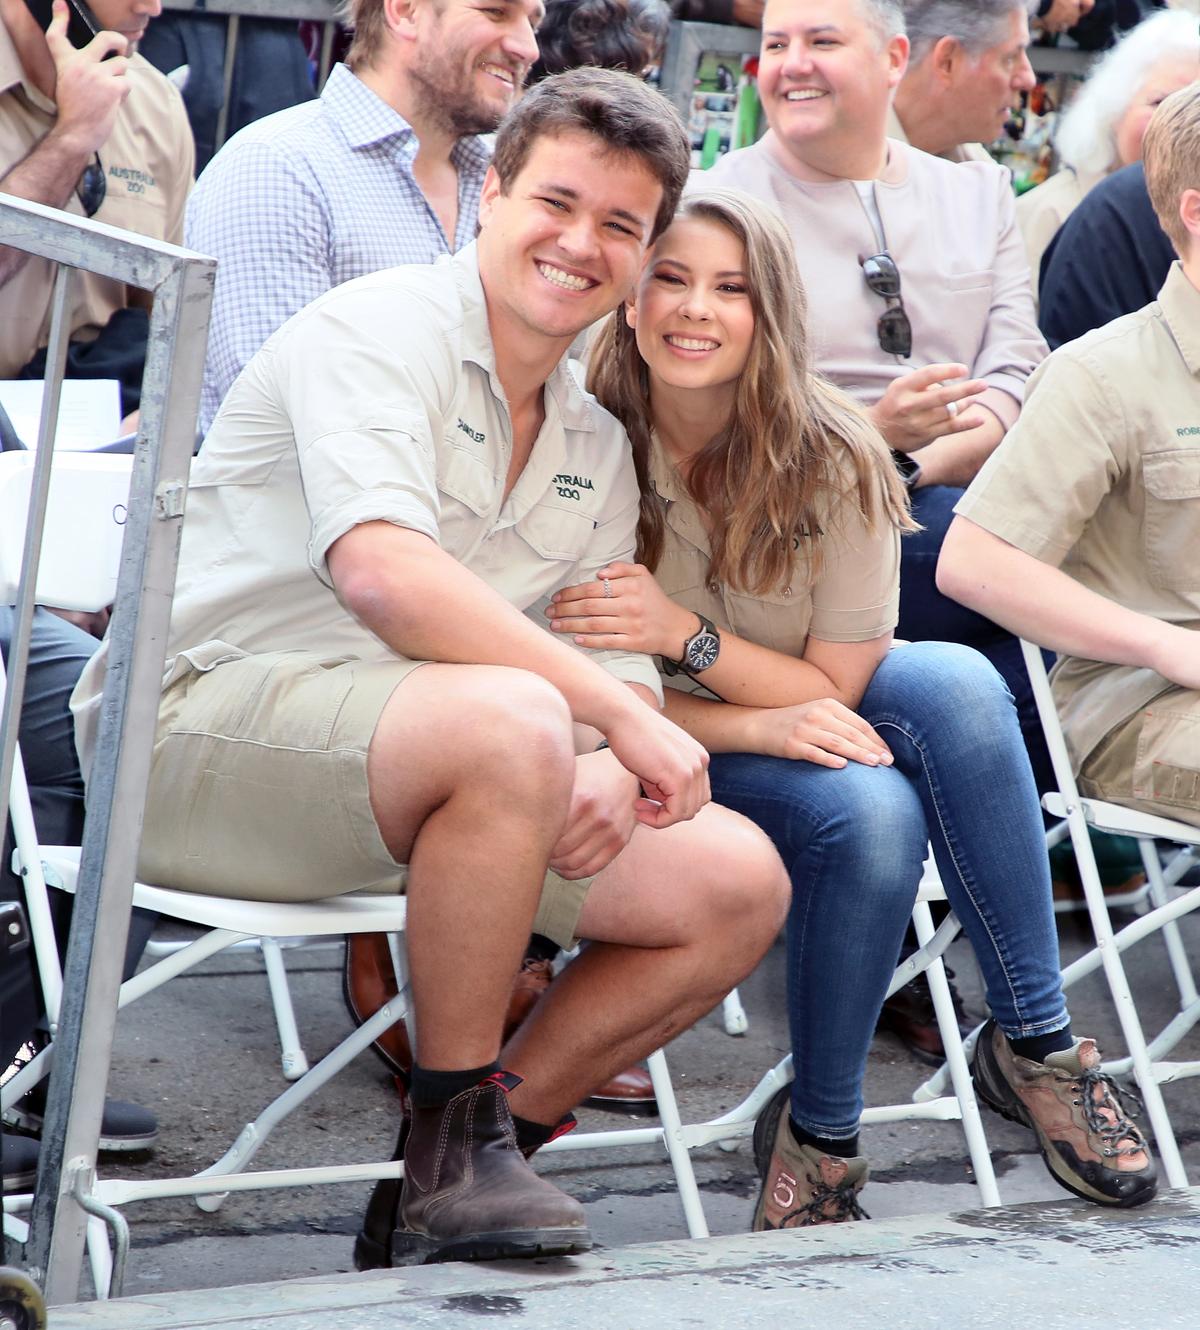 Chandler and Bindi attend Steve Irwin's posthumous Star on the Hollywood Walk of Fame ceremony in Hollywood, Calif., on April 26, 2018 (David Livingston/Getty Images)